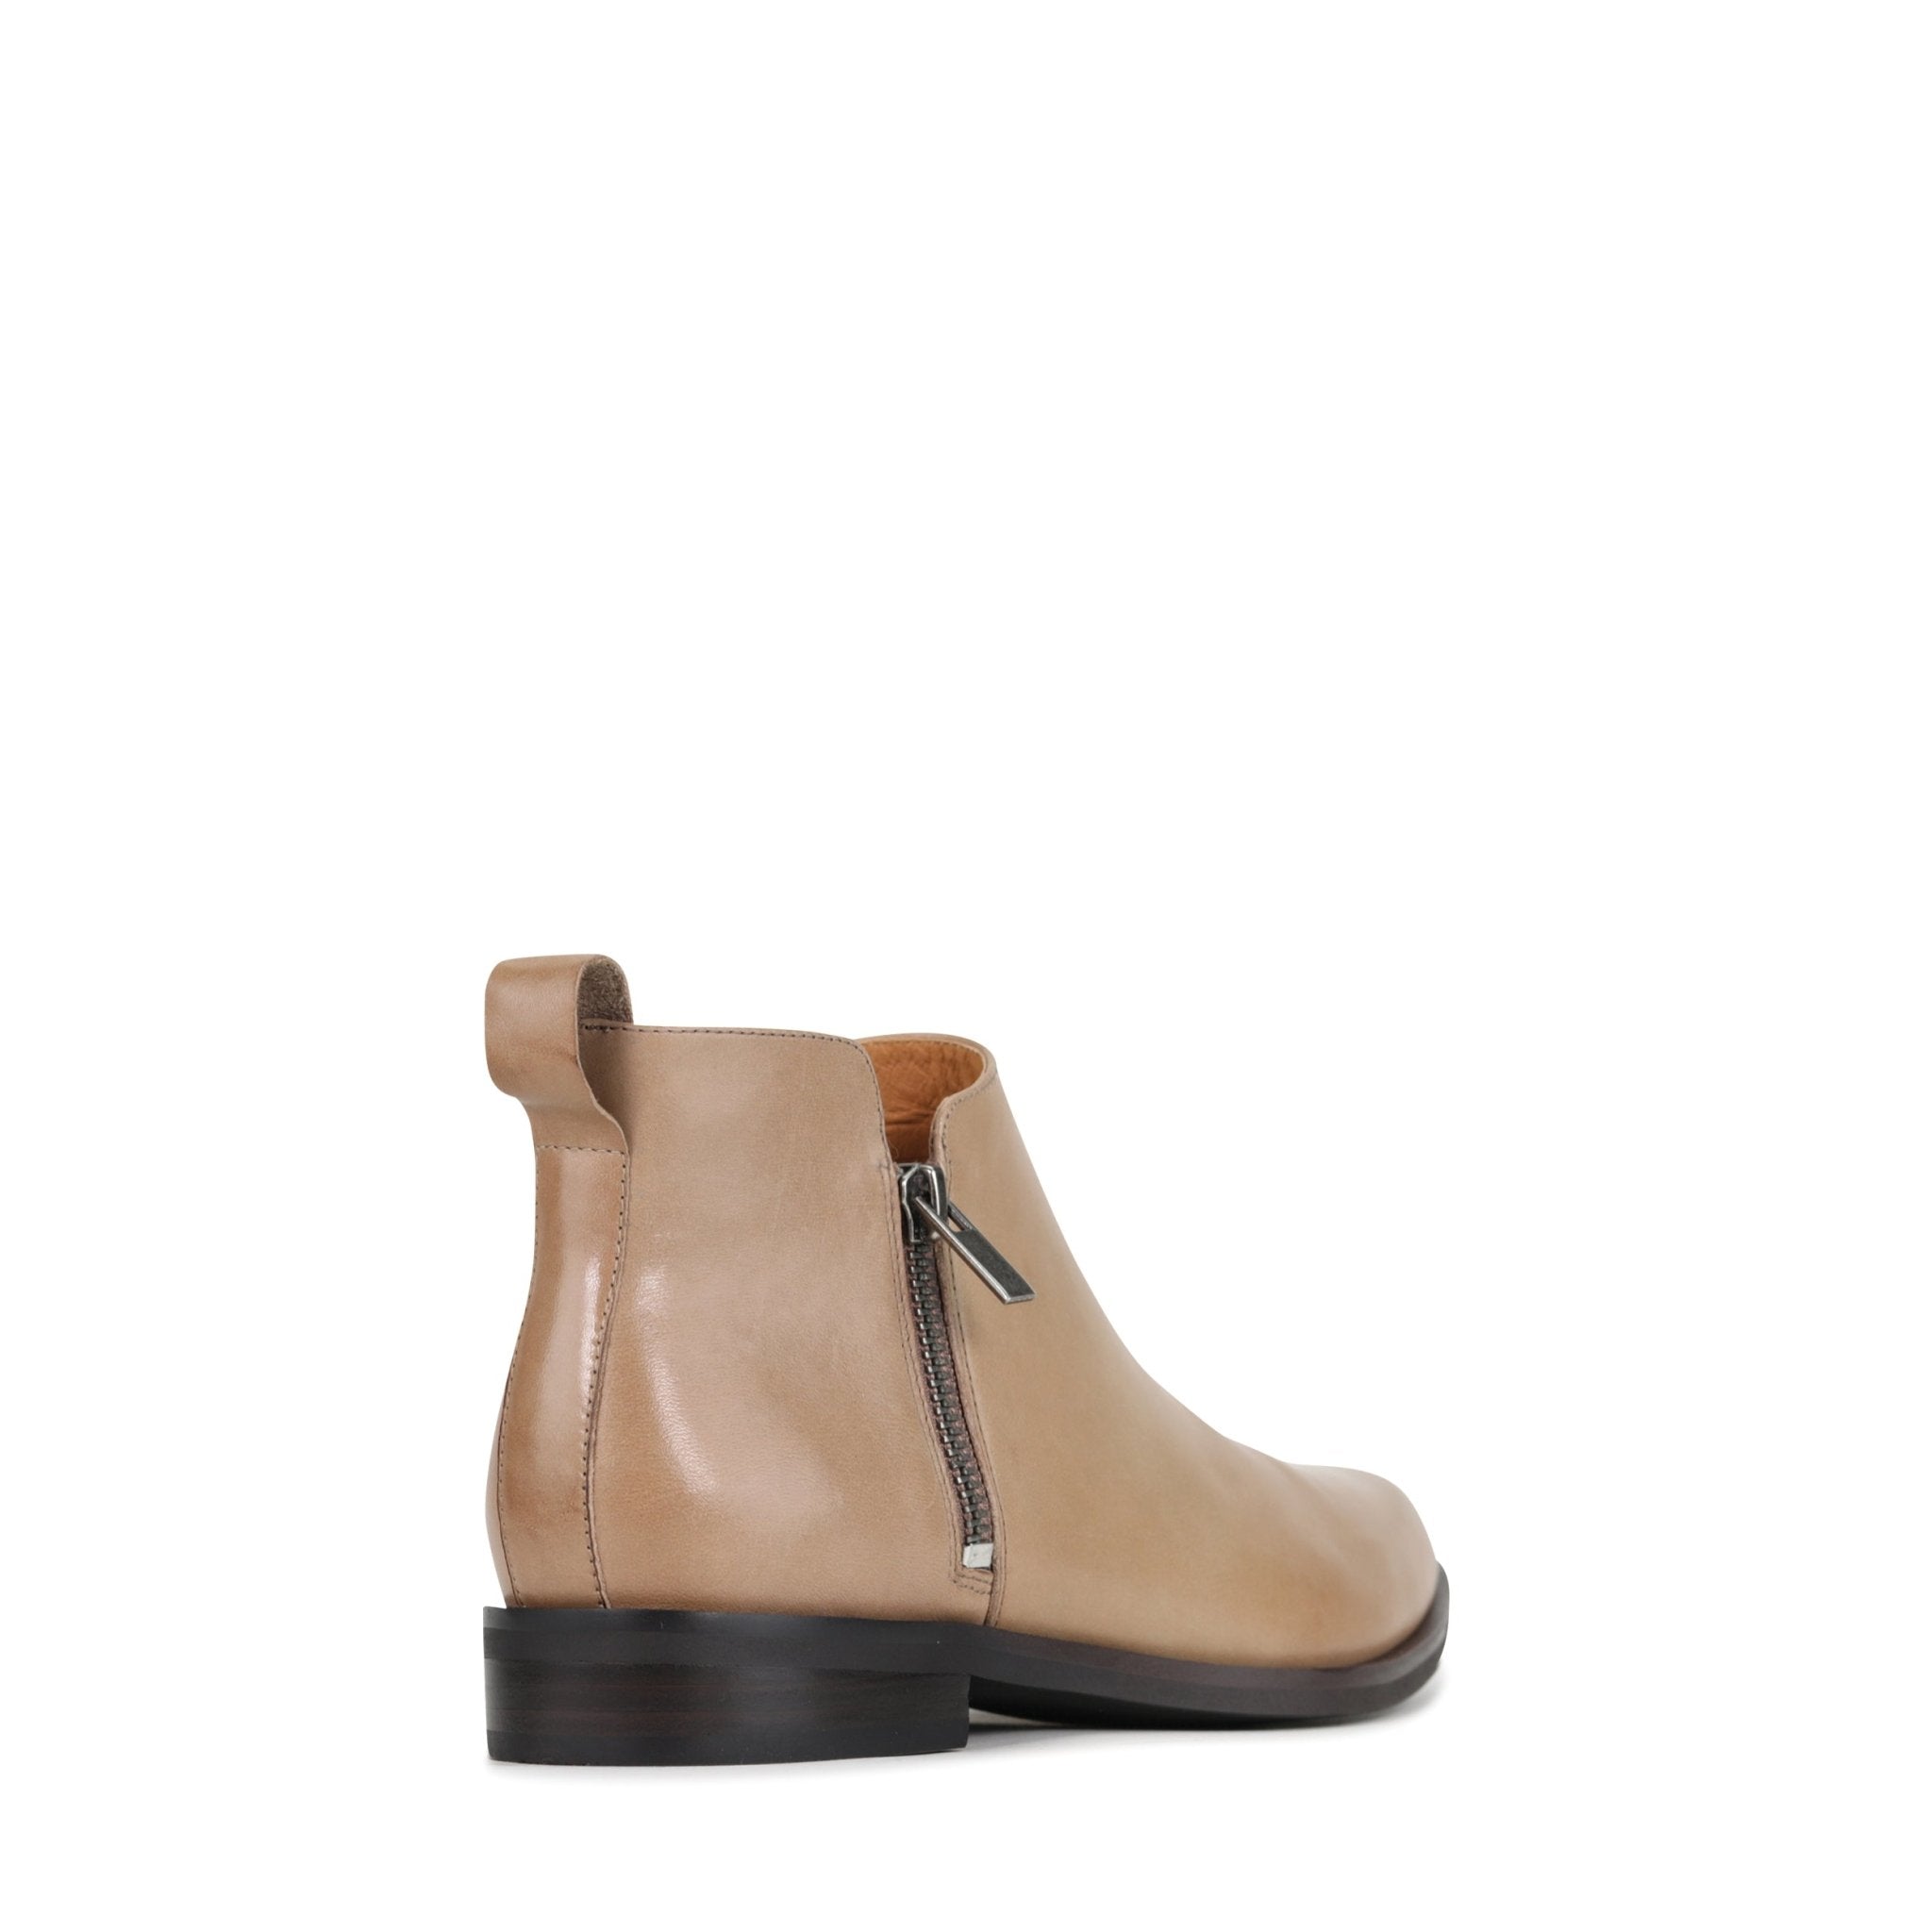 ZARINA - EOS Footwear - Ankle Boots #color_Taupe